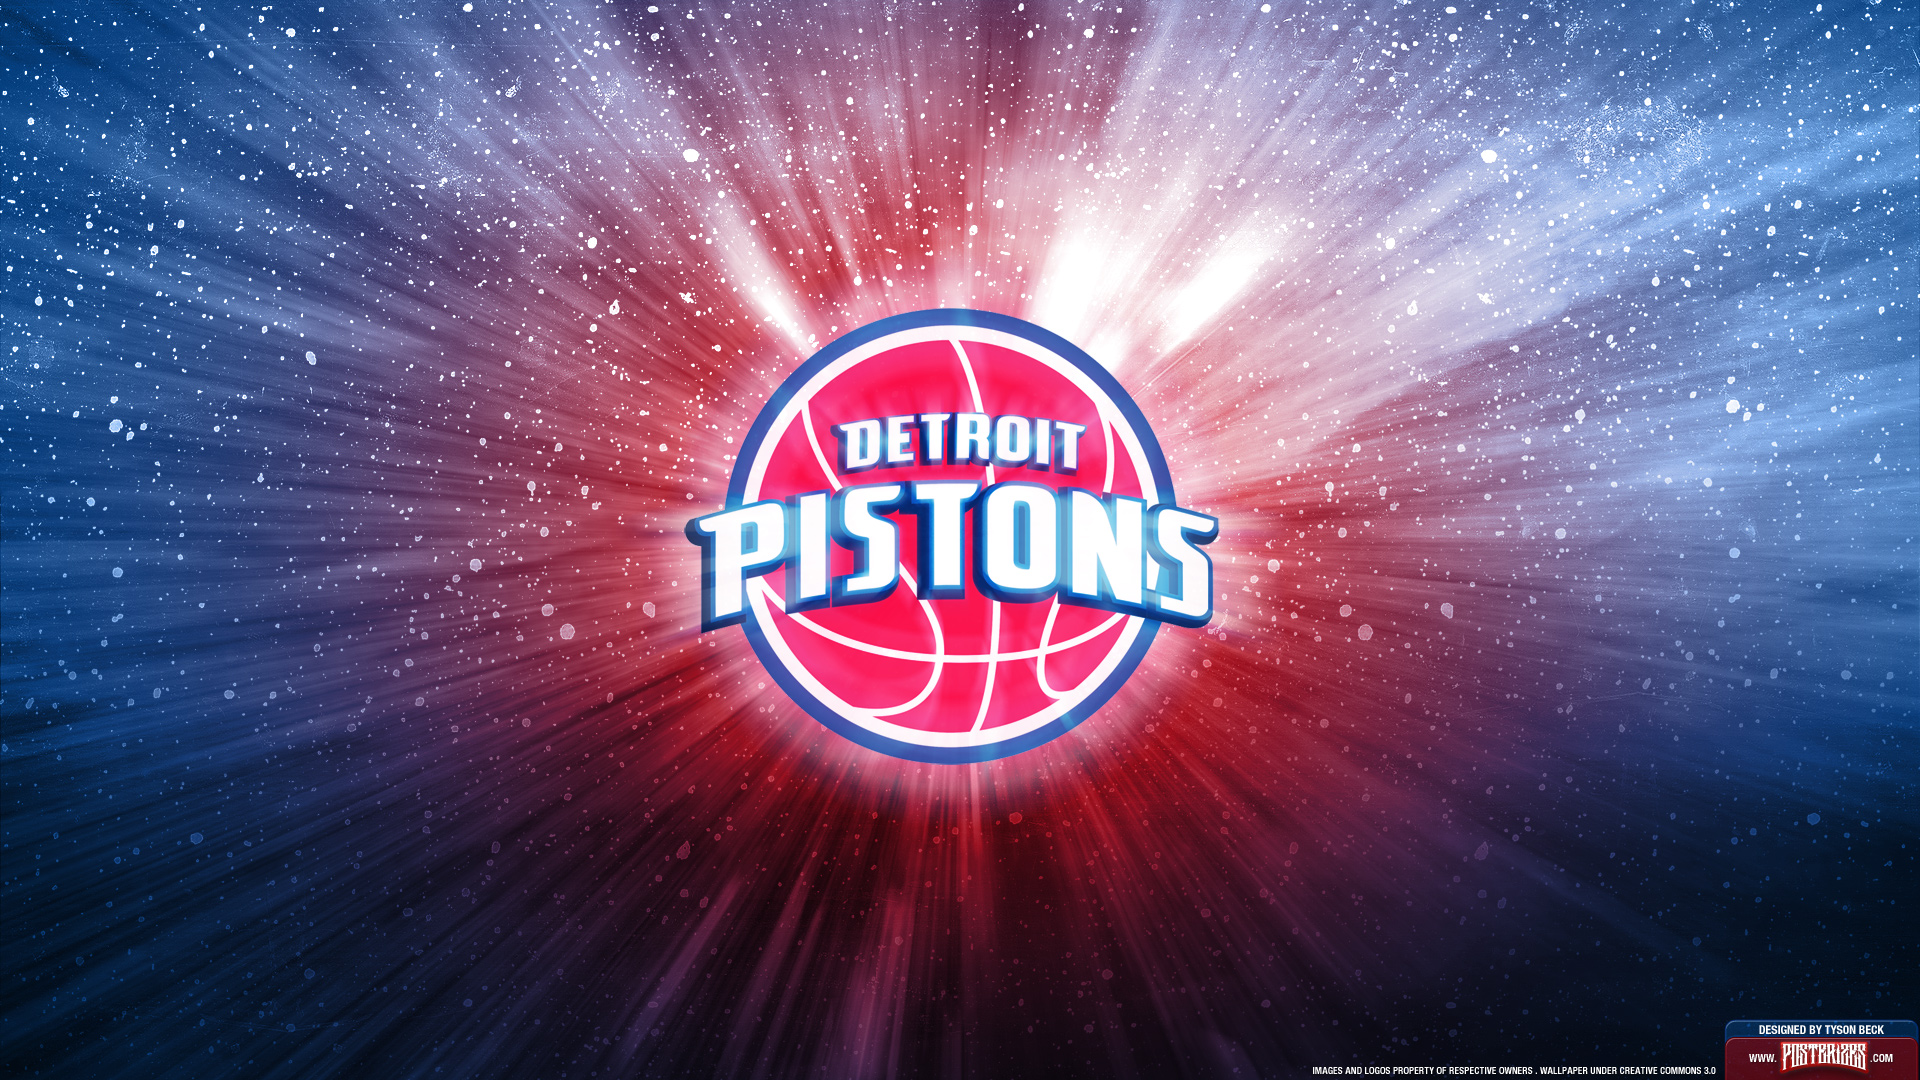 30 Detroit Pistons HD Wallpapers and Backgrounds